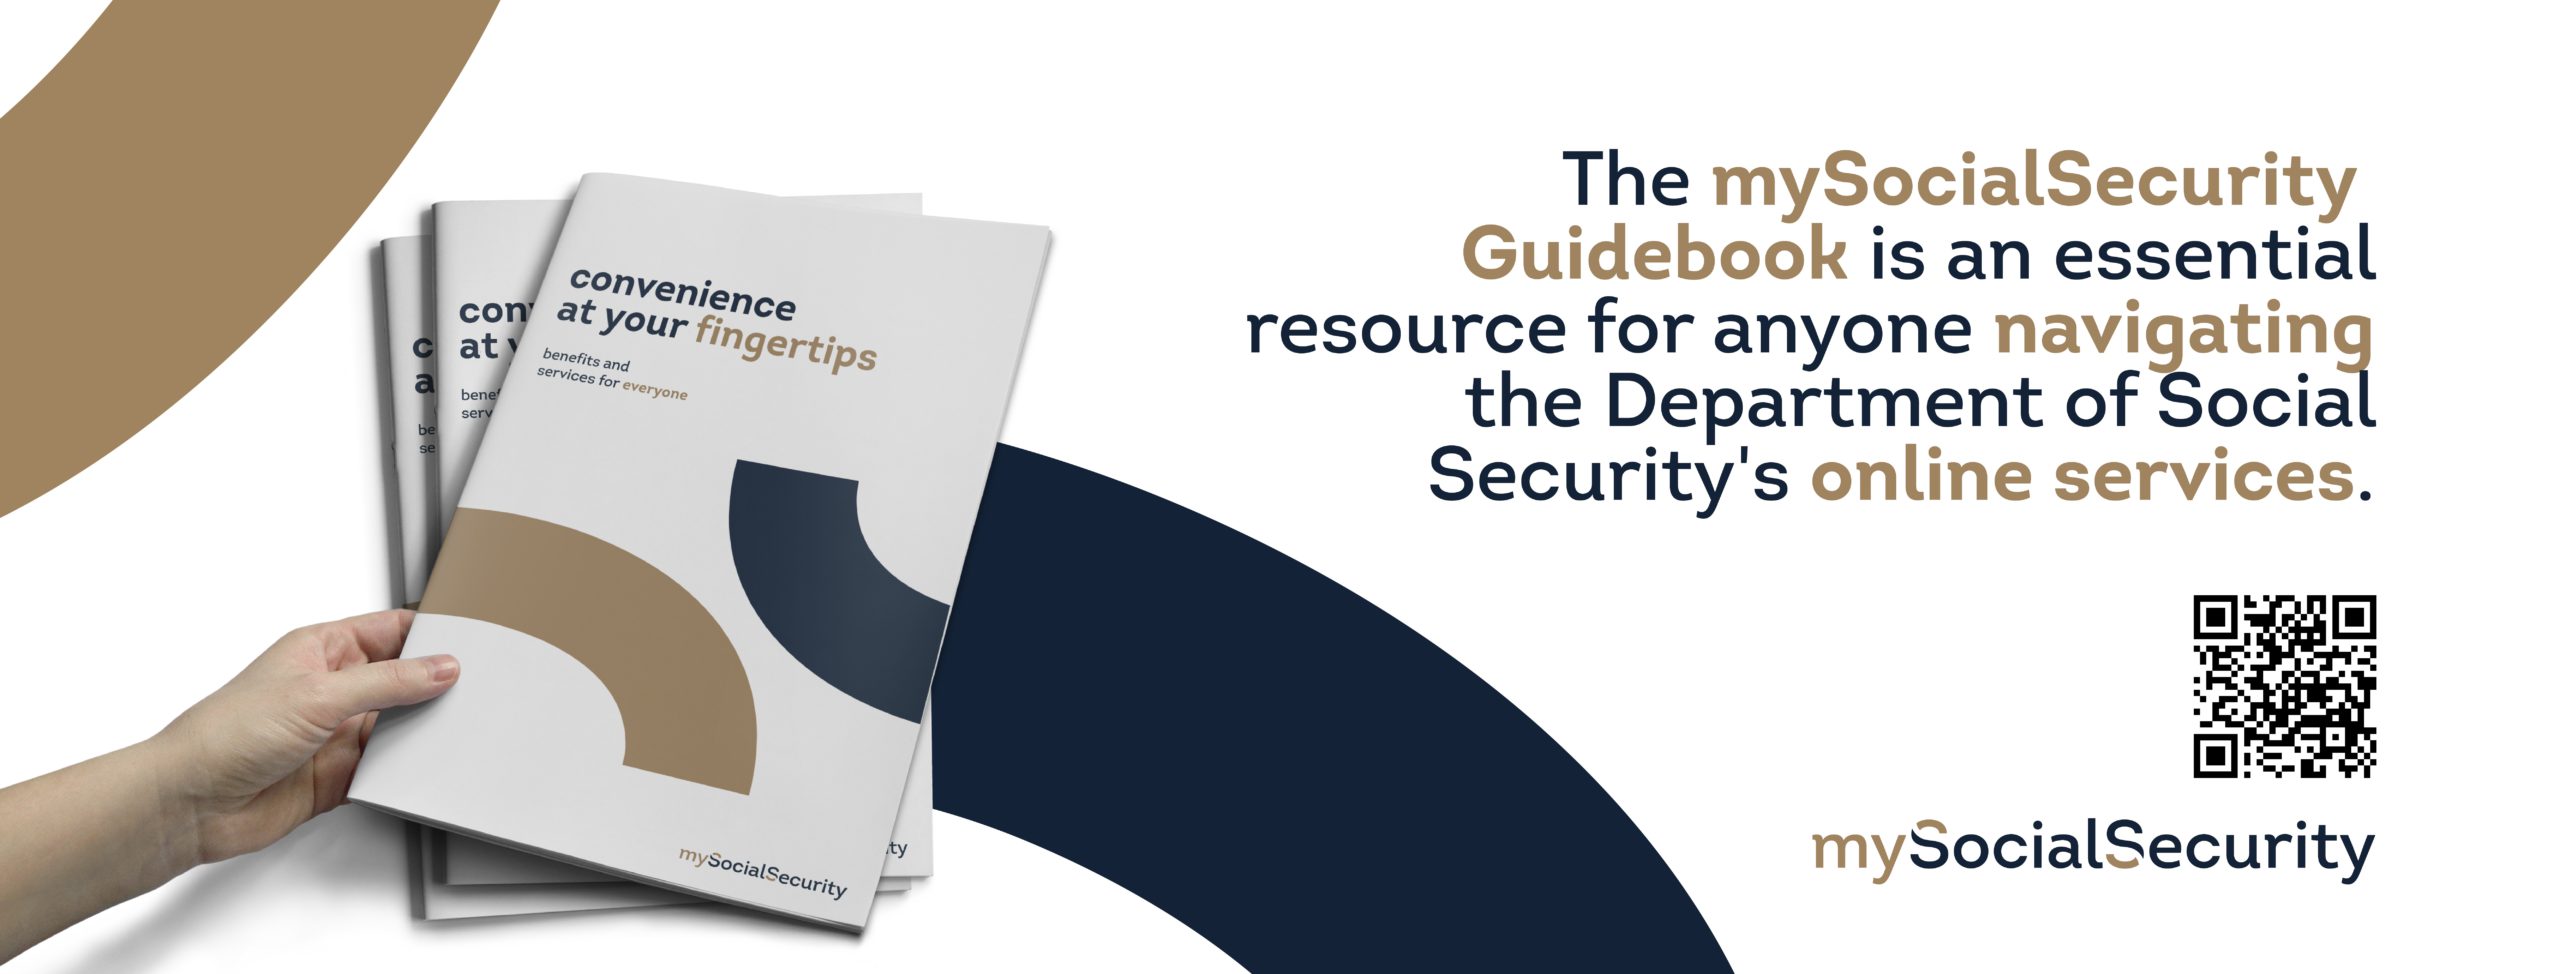 The mySocialSecurity Guidebook is an essential resource for anyone navigating the Department of Social Security's online services.